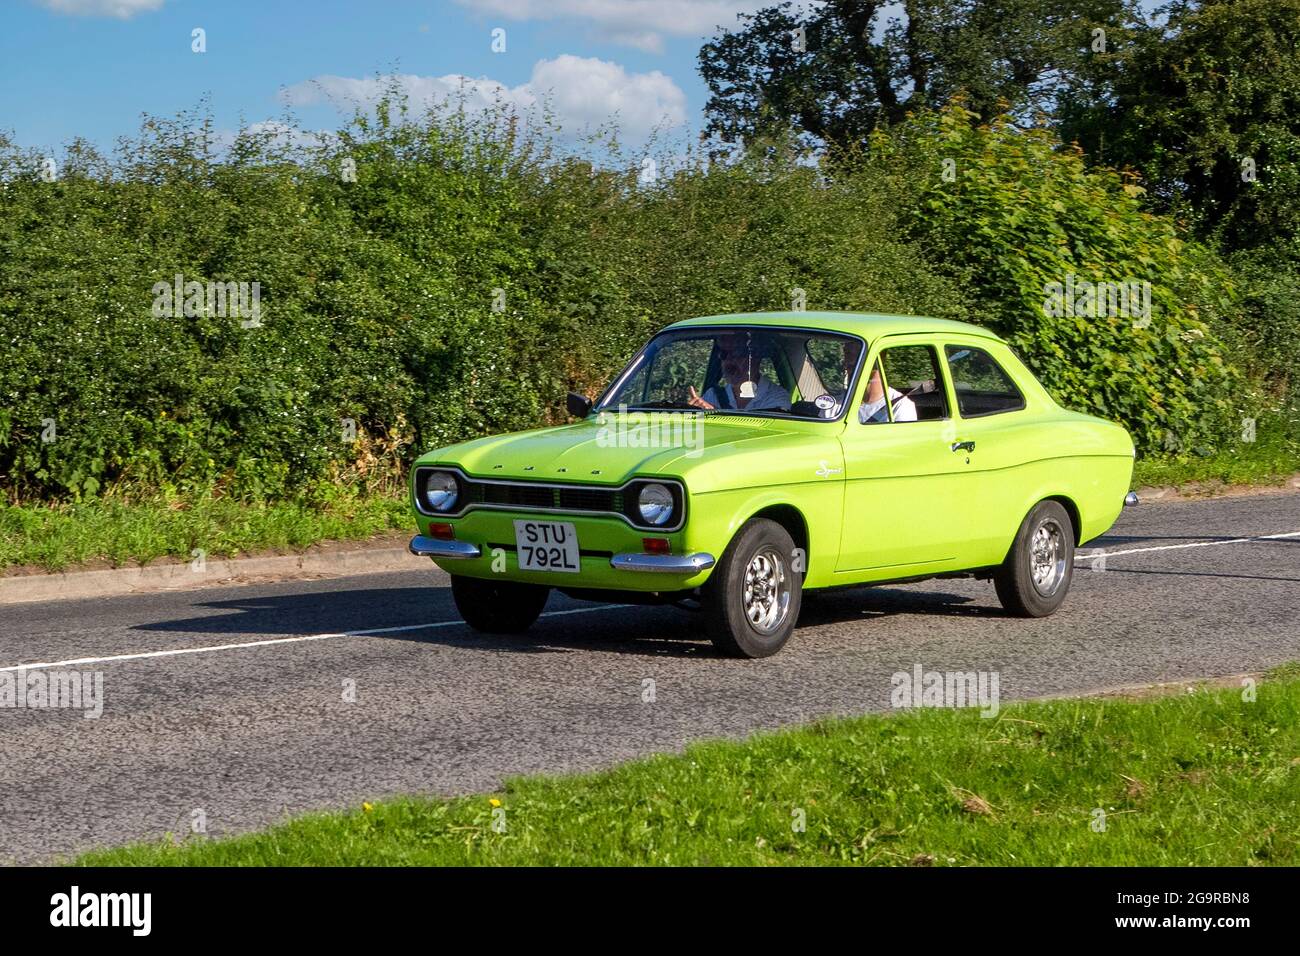 1973 70s green Ford Escort 2dr saloon vehicle en-route to Capesthorne Hall classic July car show, Cheshire, UK Stock Photo